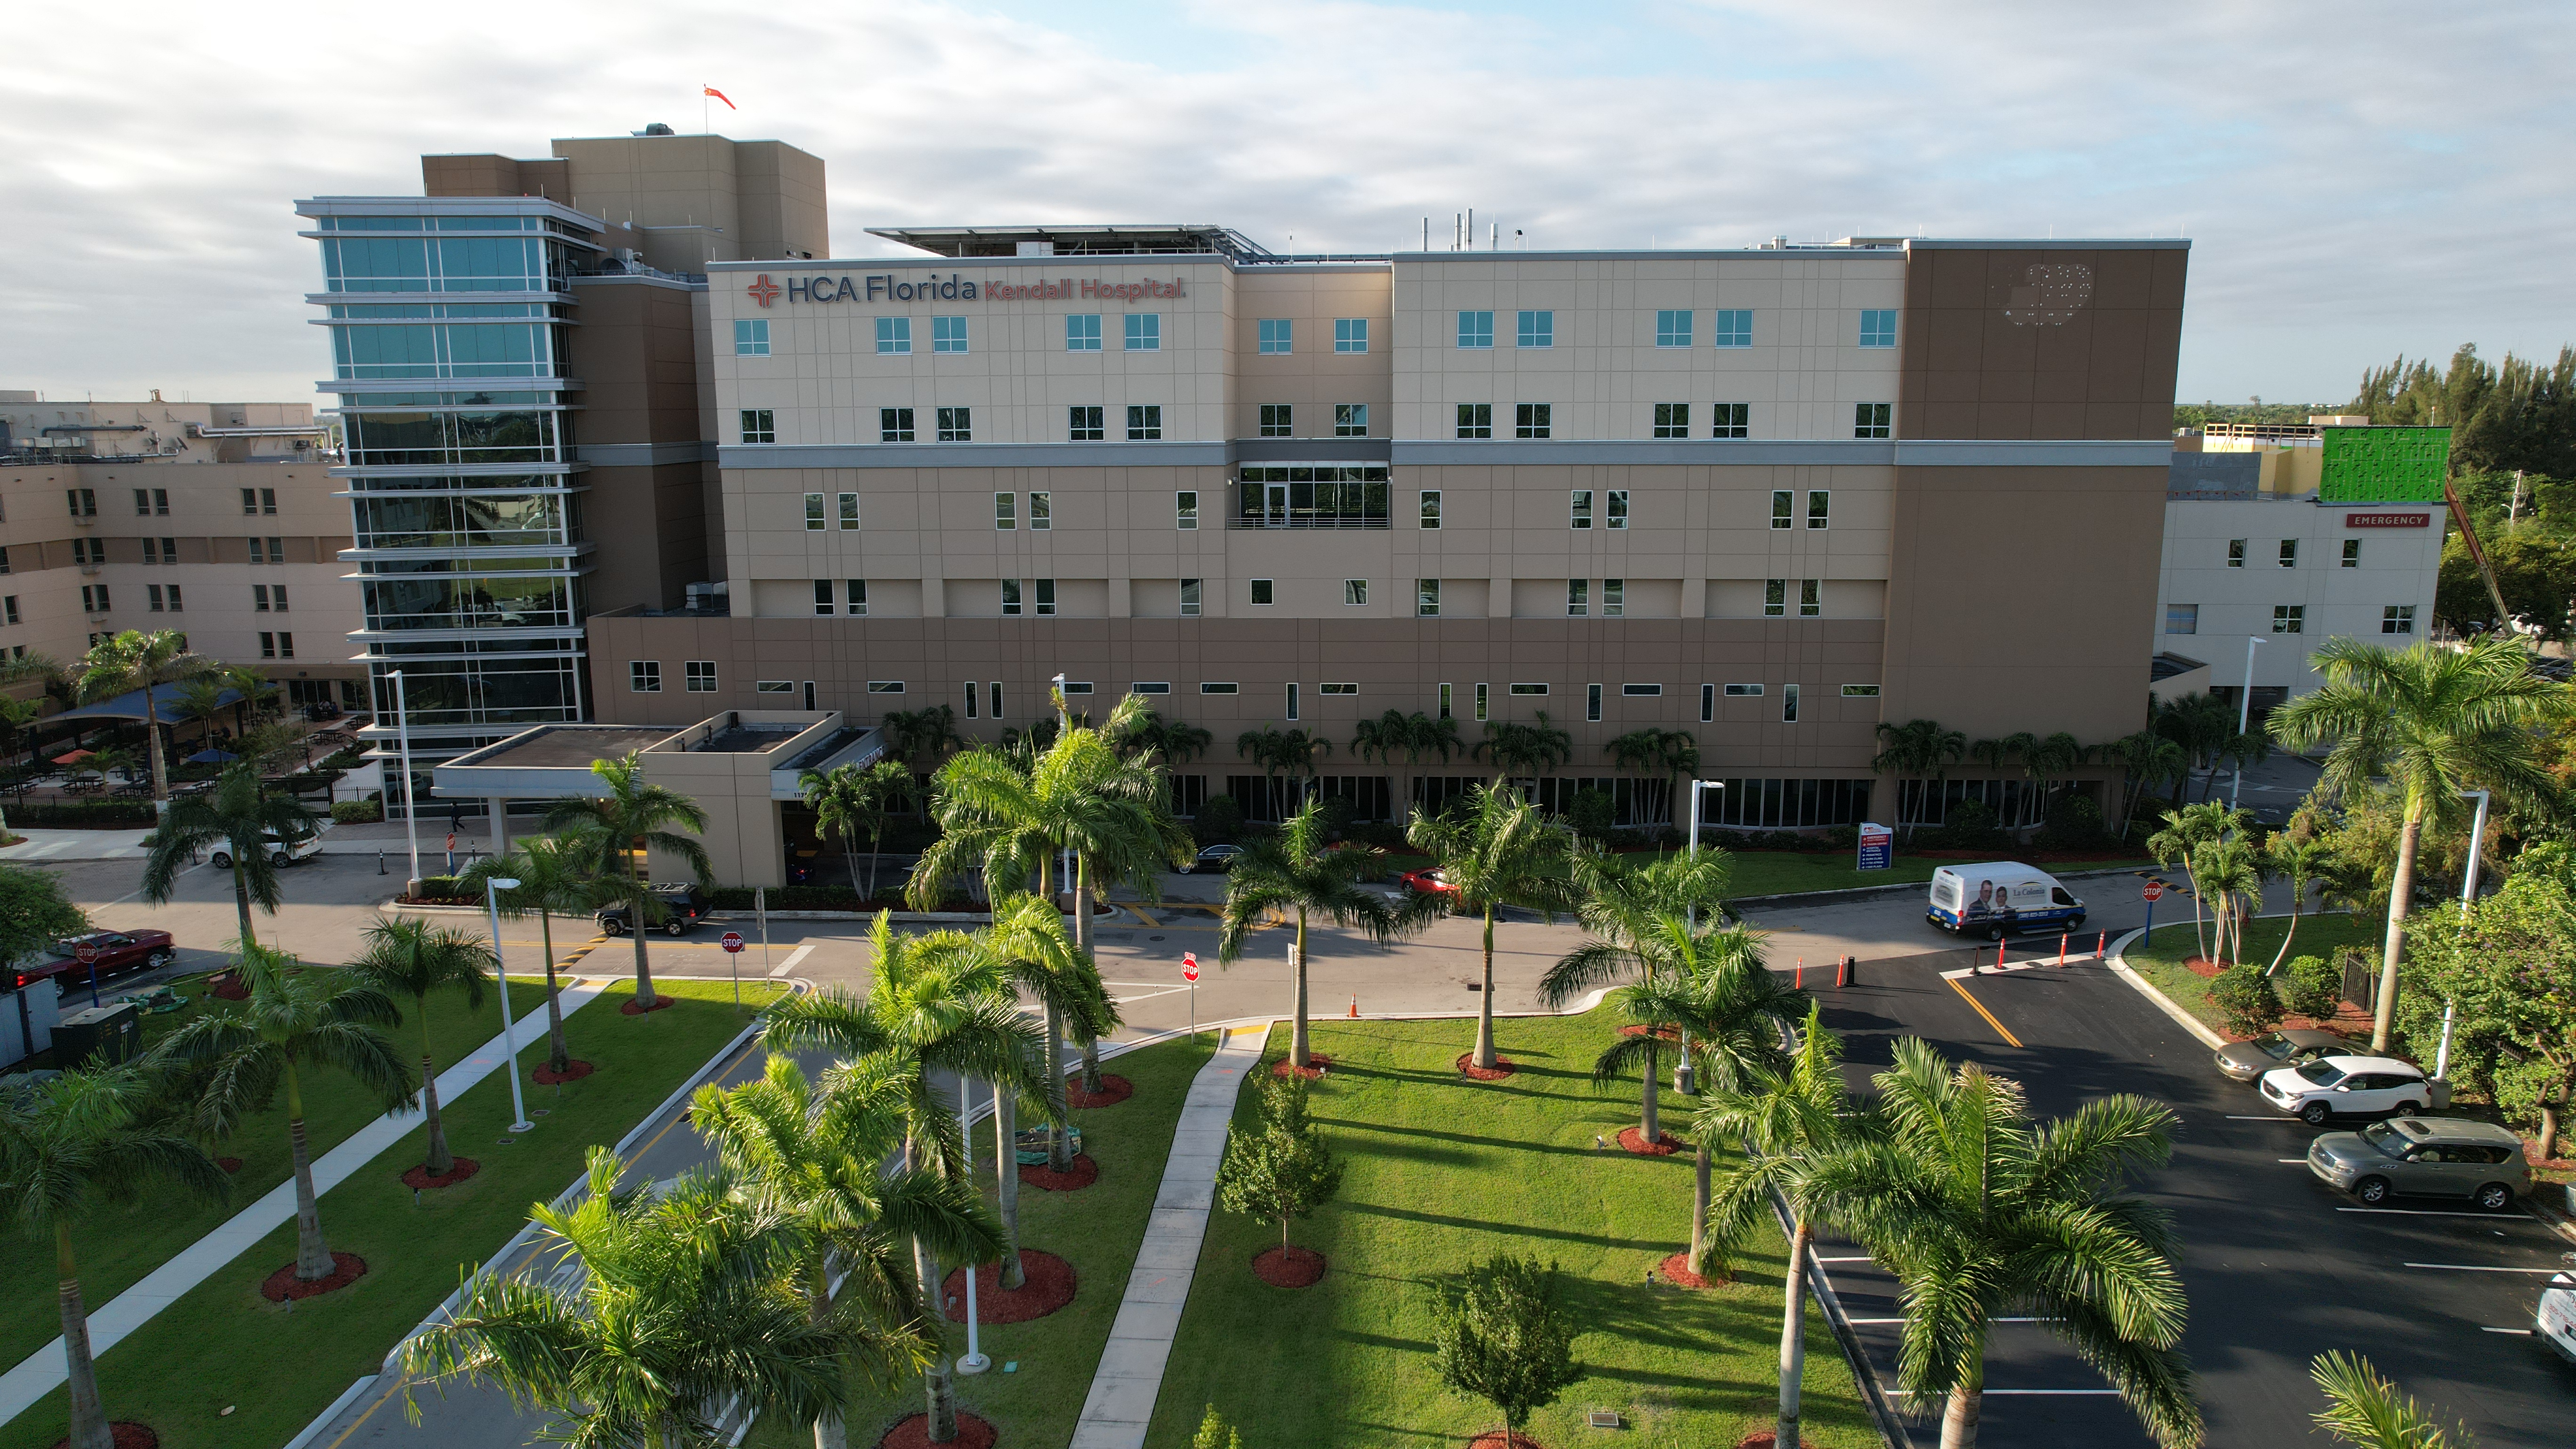 Kendall Hospital entrance, a white, tan, brown building. Walkways ined by palm trees.